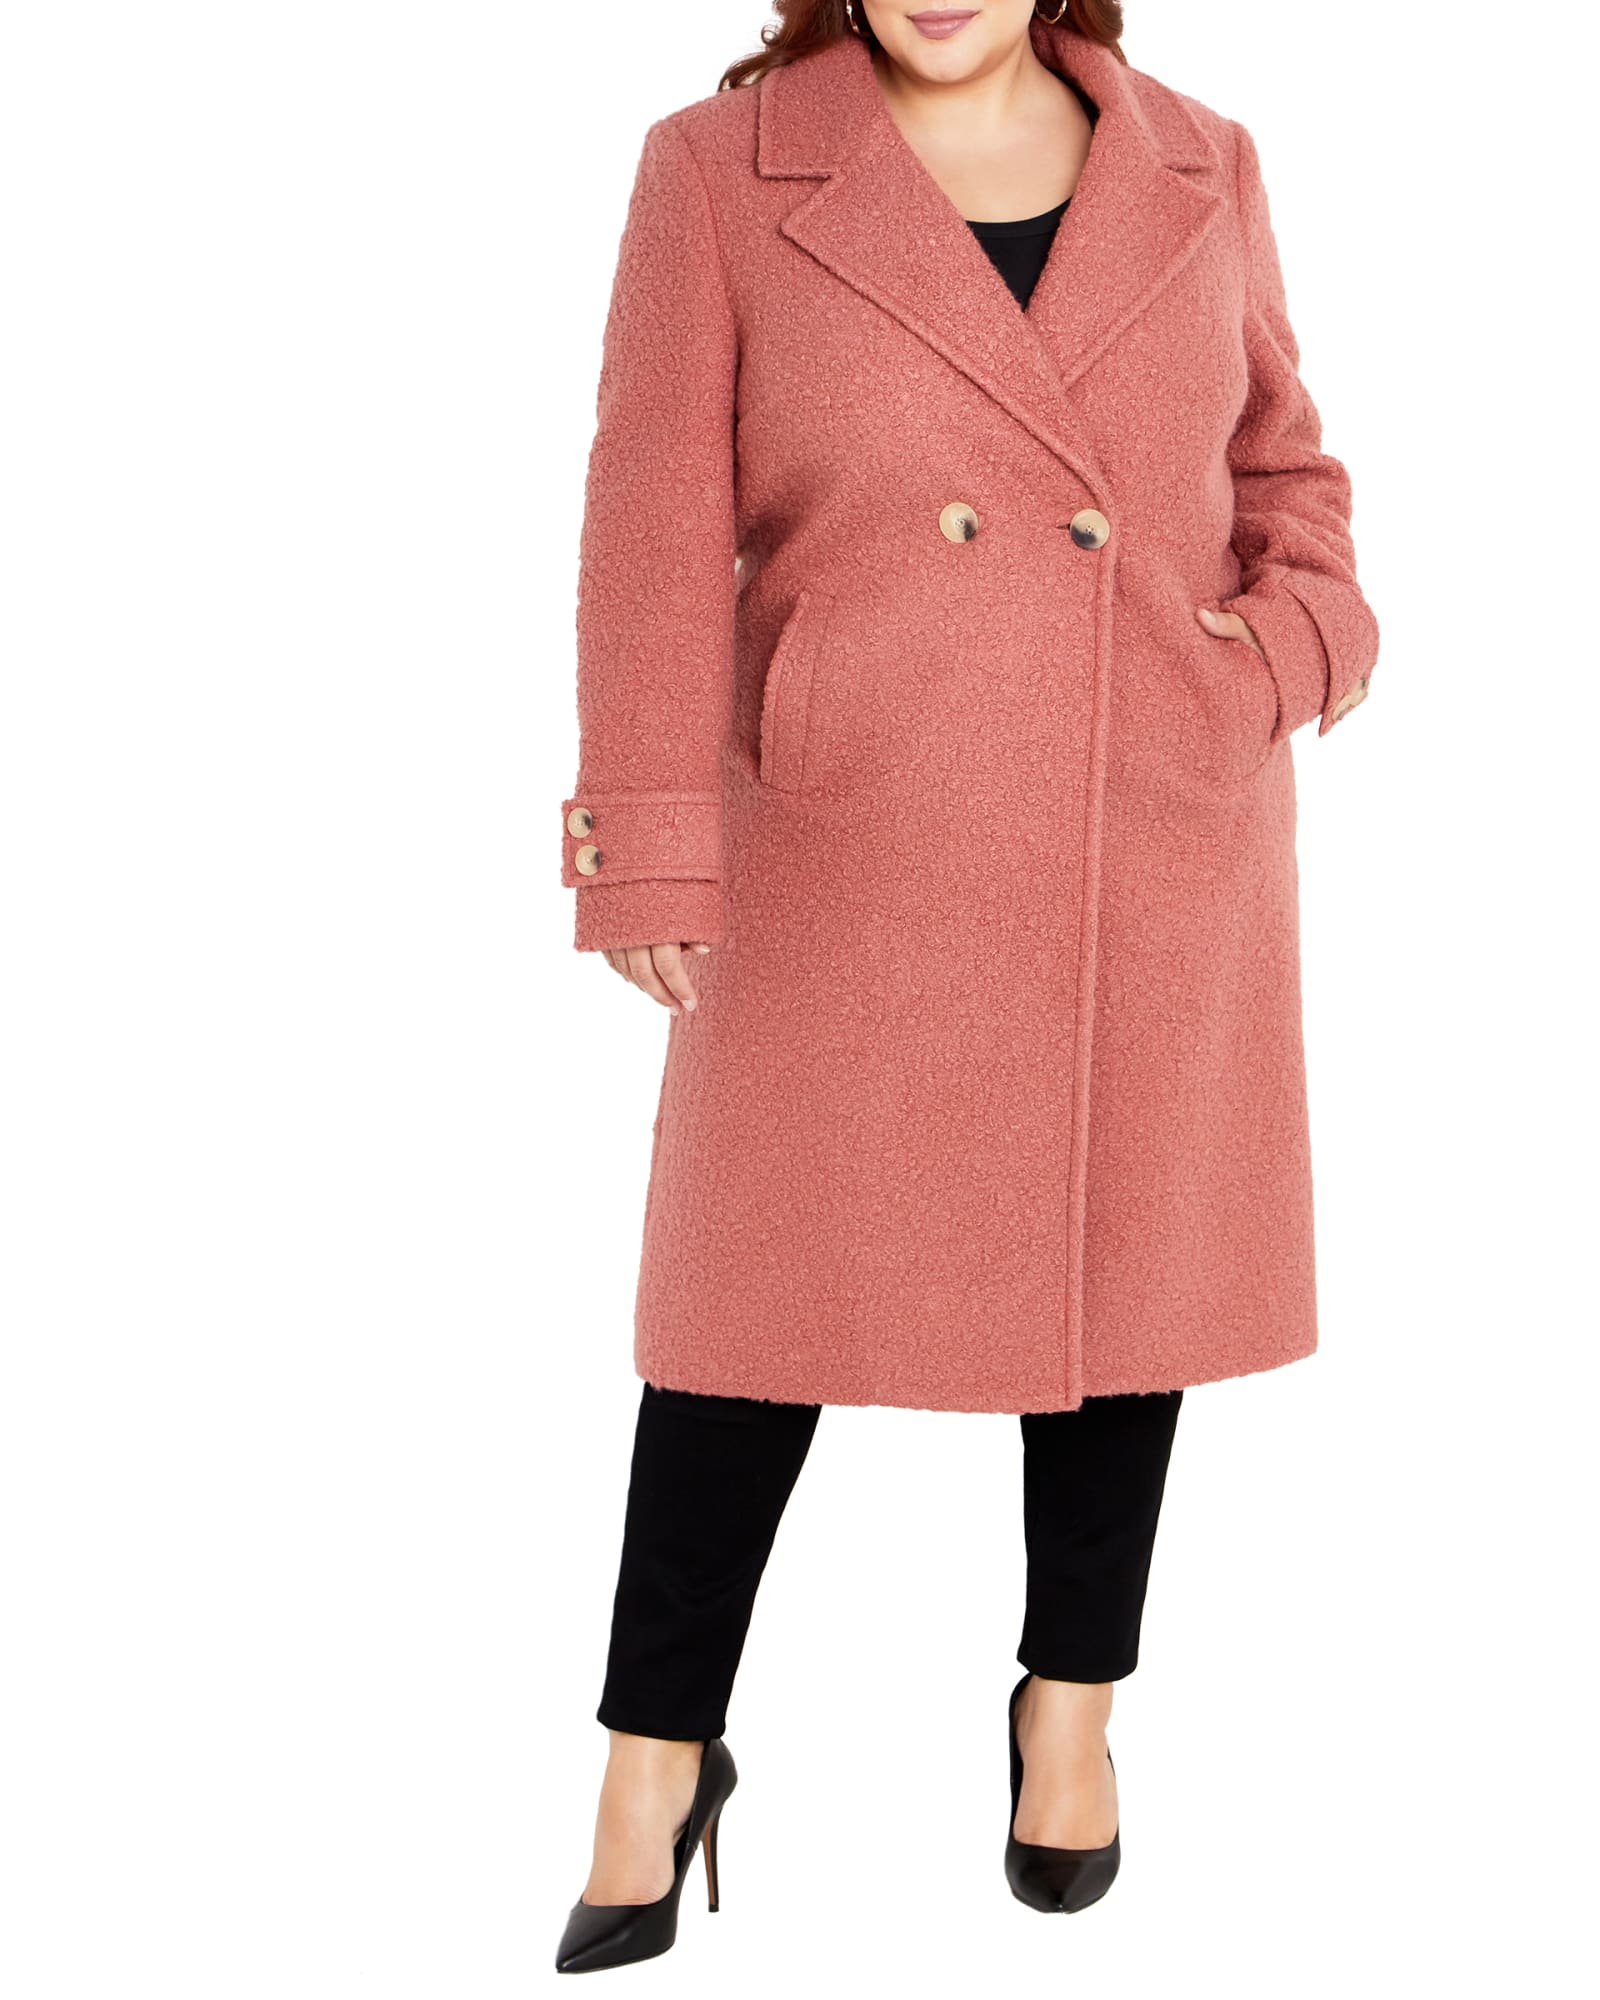 Women's Cold Weather Coats